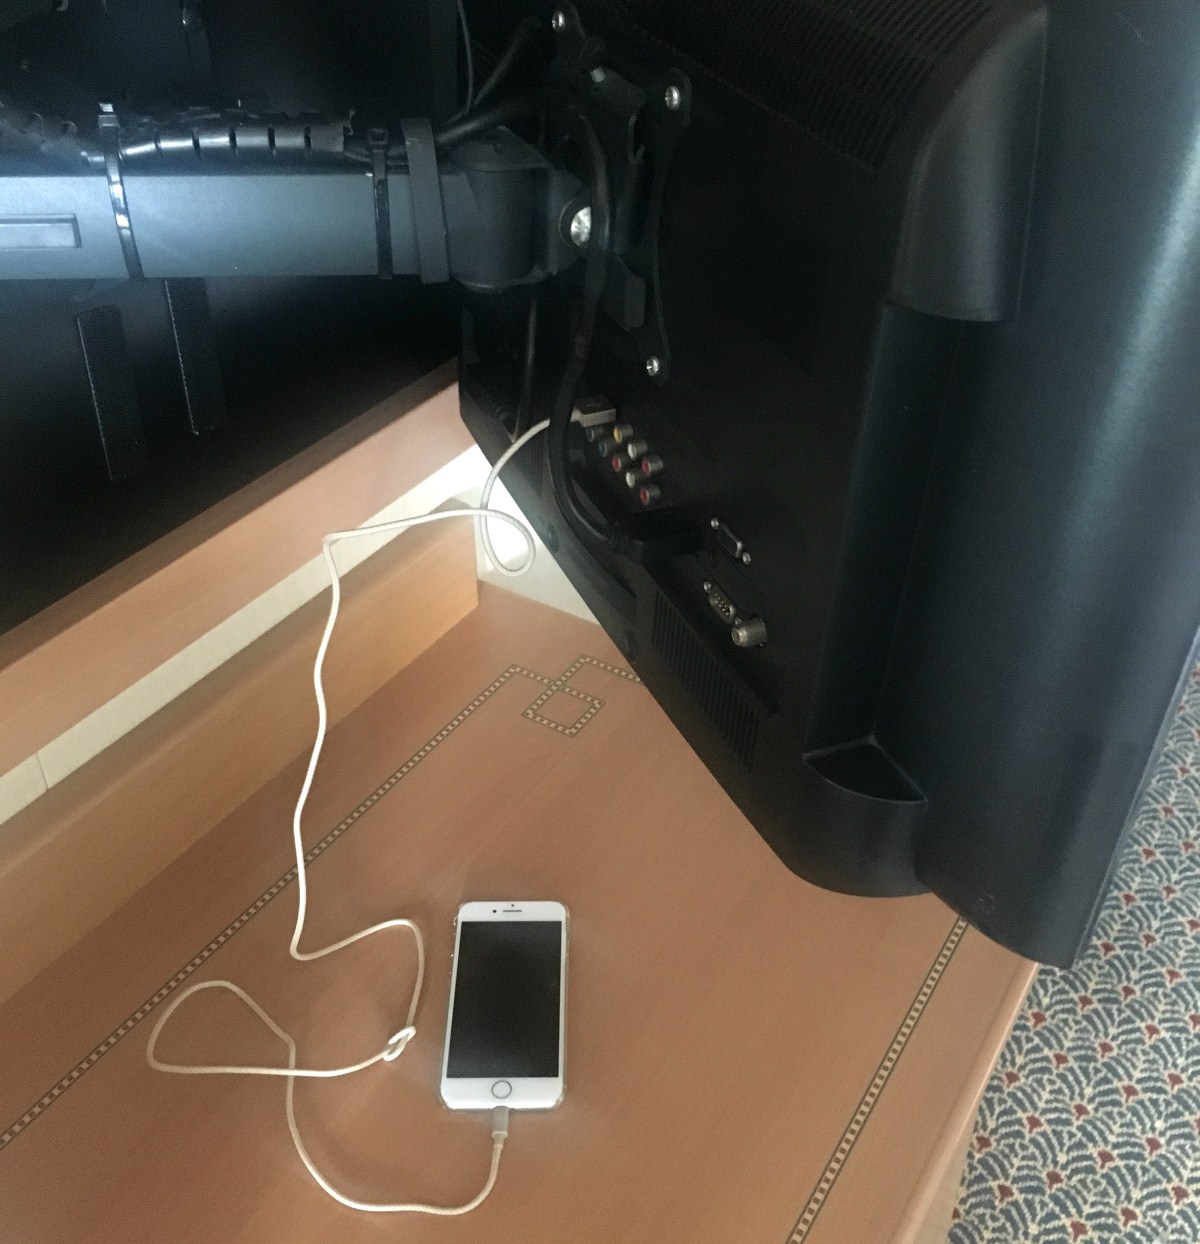 using a usb charger back of tv to charge smartphone